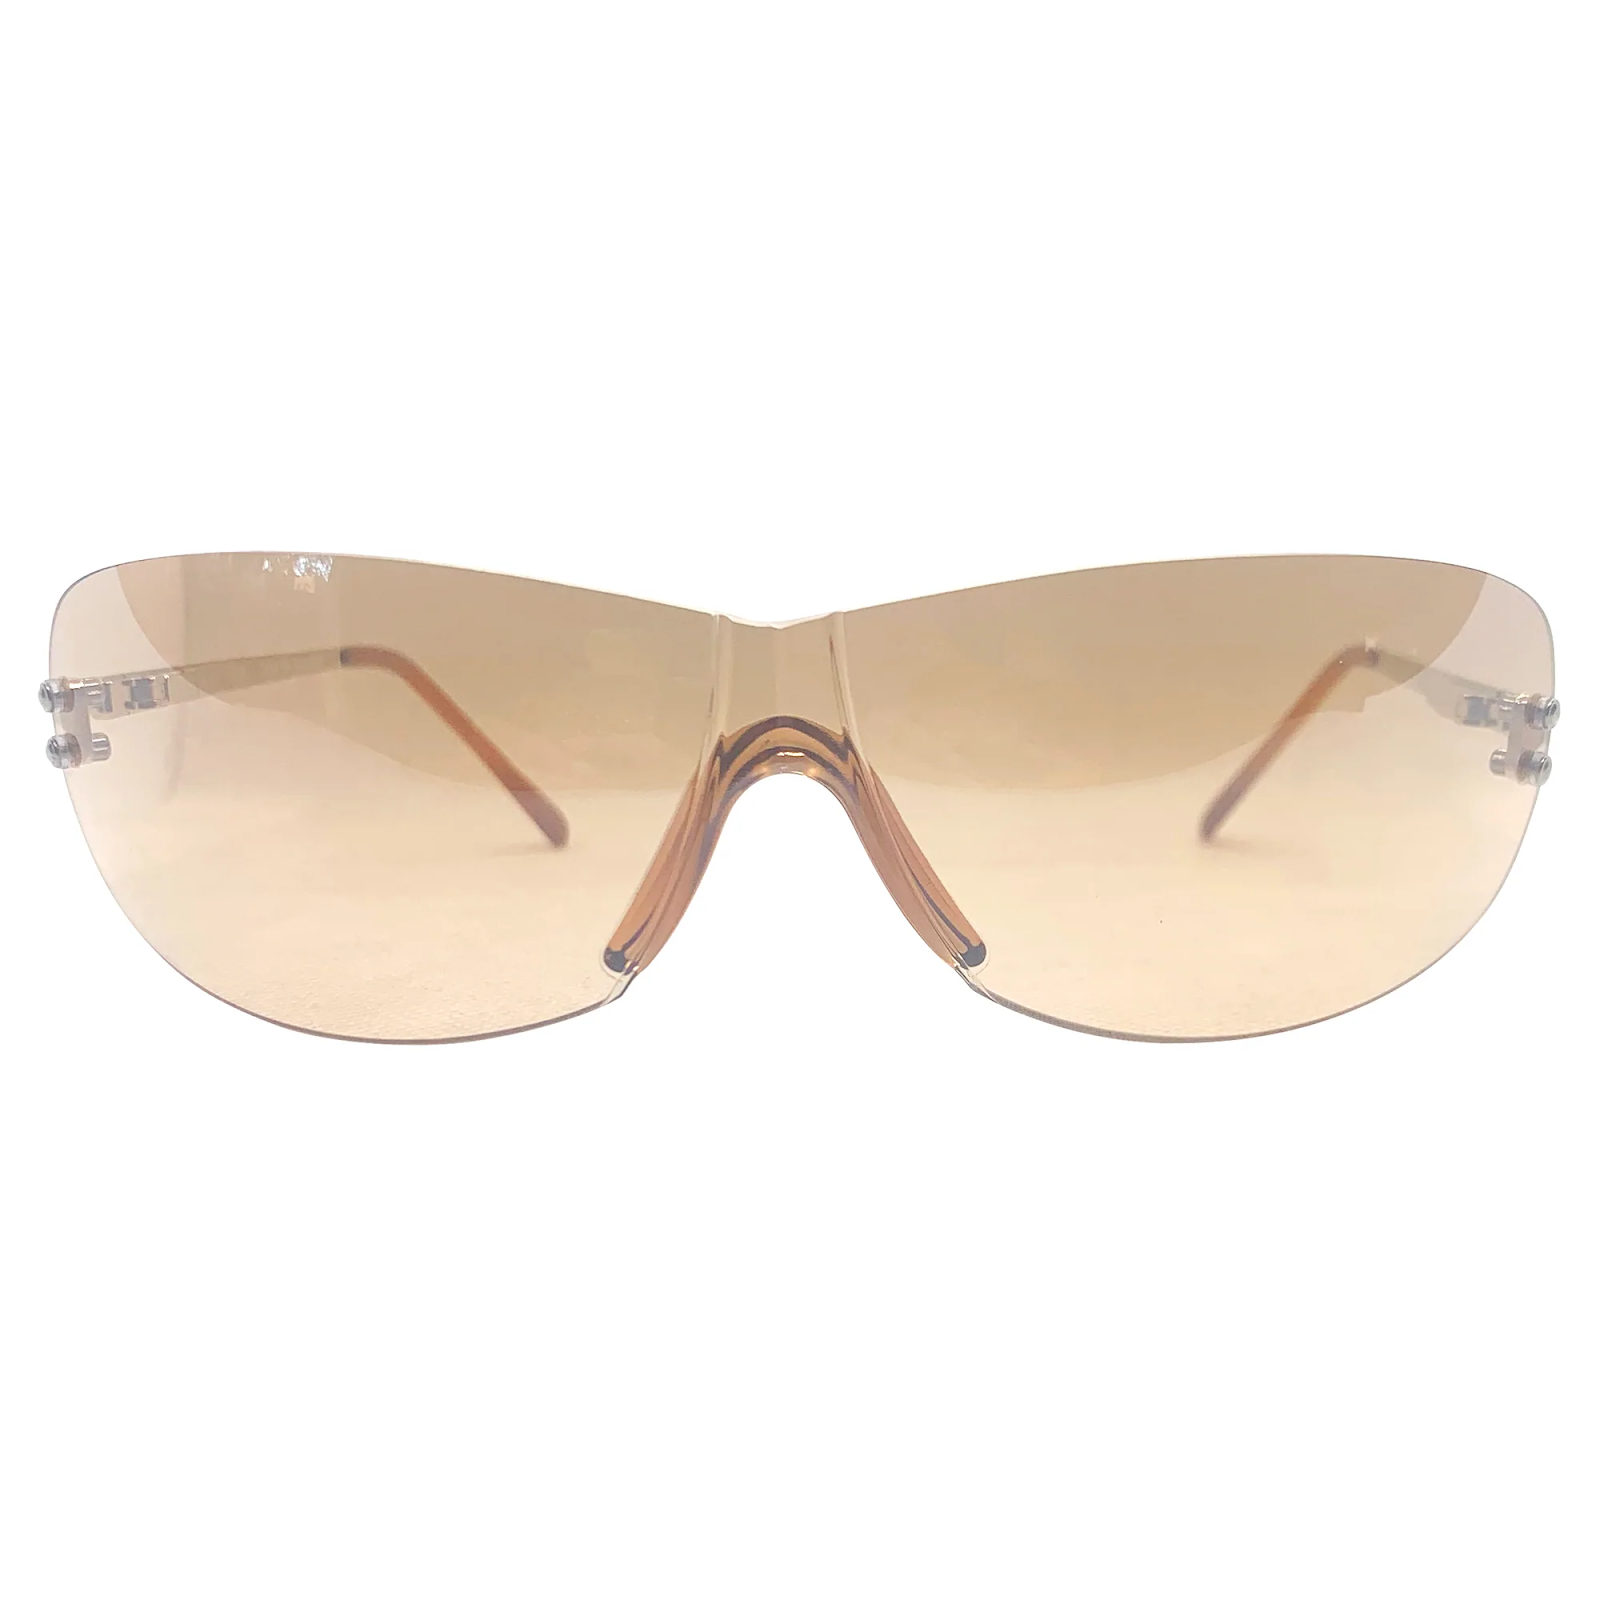 Giant Vintage ‘BOWIE PINOT’ Sunglasses